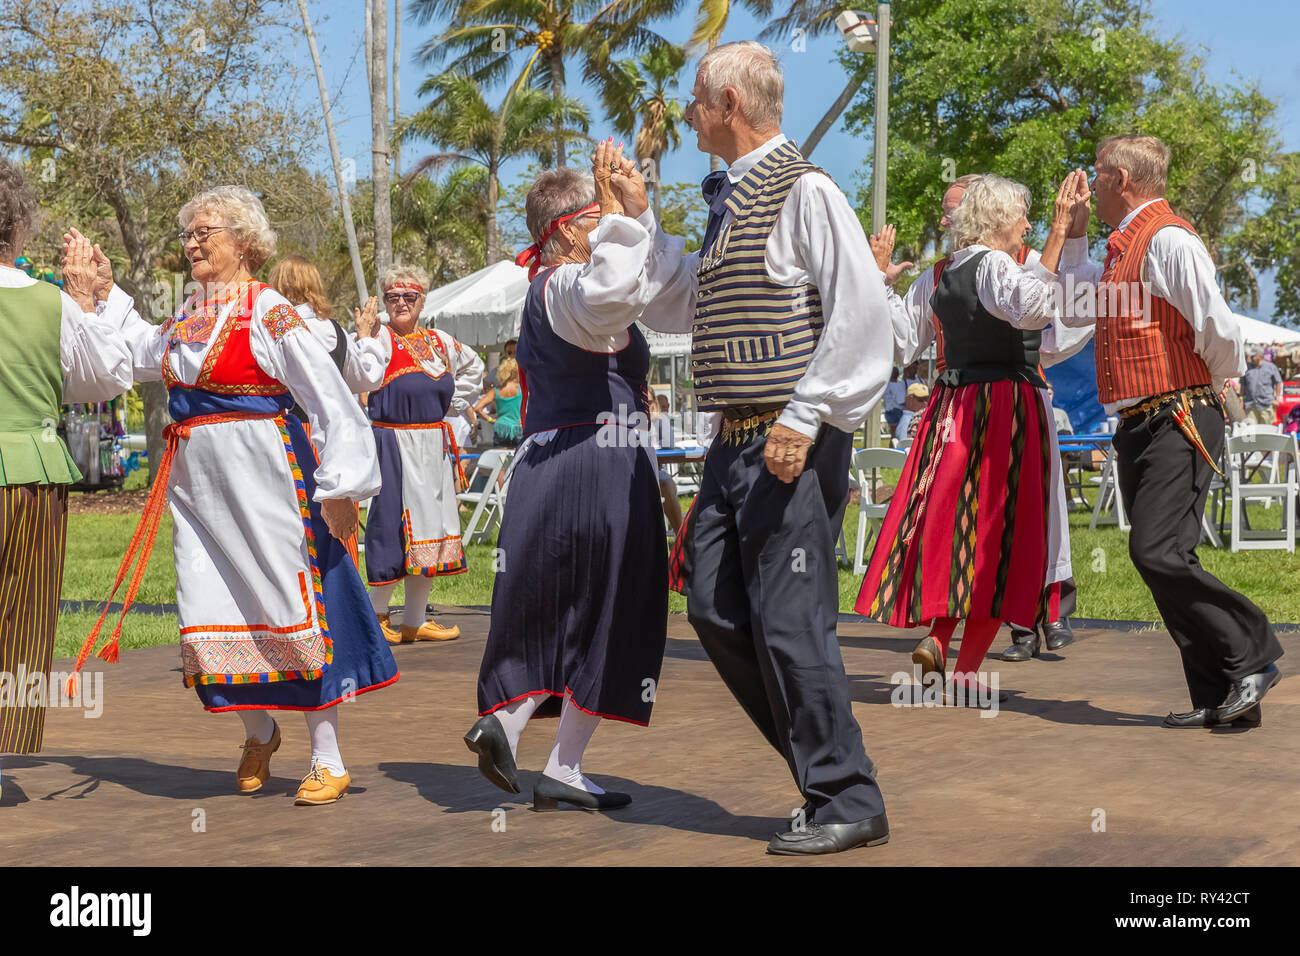 Lake Worth, FL, USA March 3, 2019, Midnight Sun Festival Celebrating Finnish CultureThe couples hold the other partner's right hand up as they twirl. Stock Photo